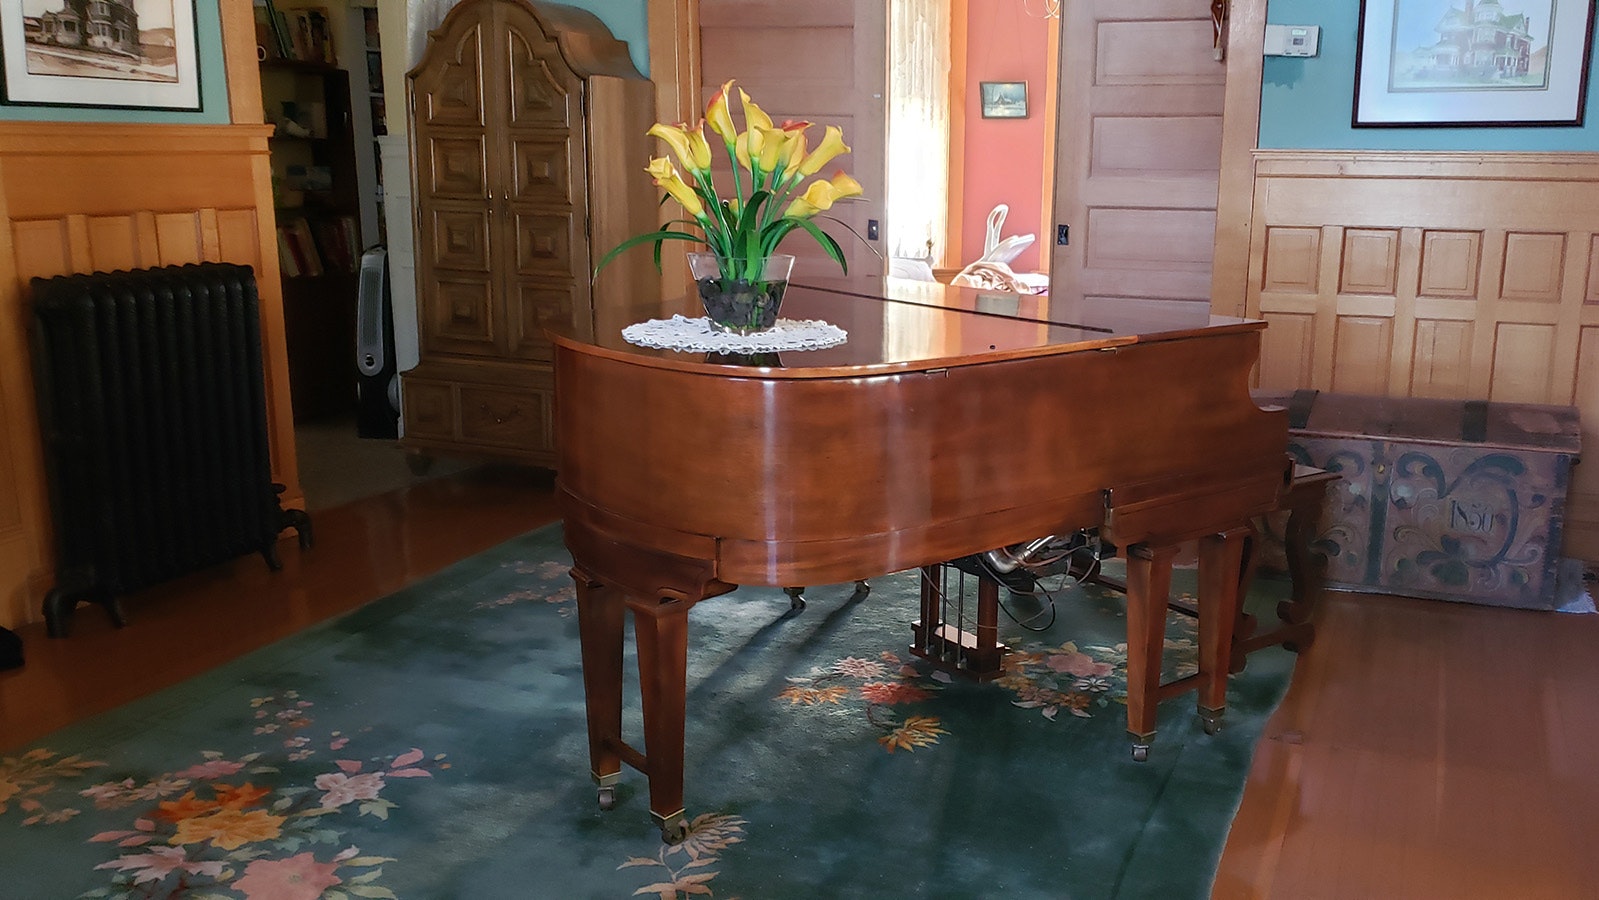 A turn of the 20th century player piano. It doesn't work, but is still a beautiful centerpiece in the foyer of the Ferris Mansion.